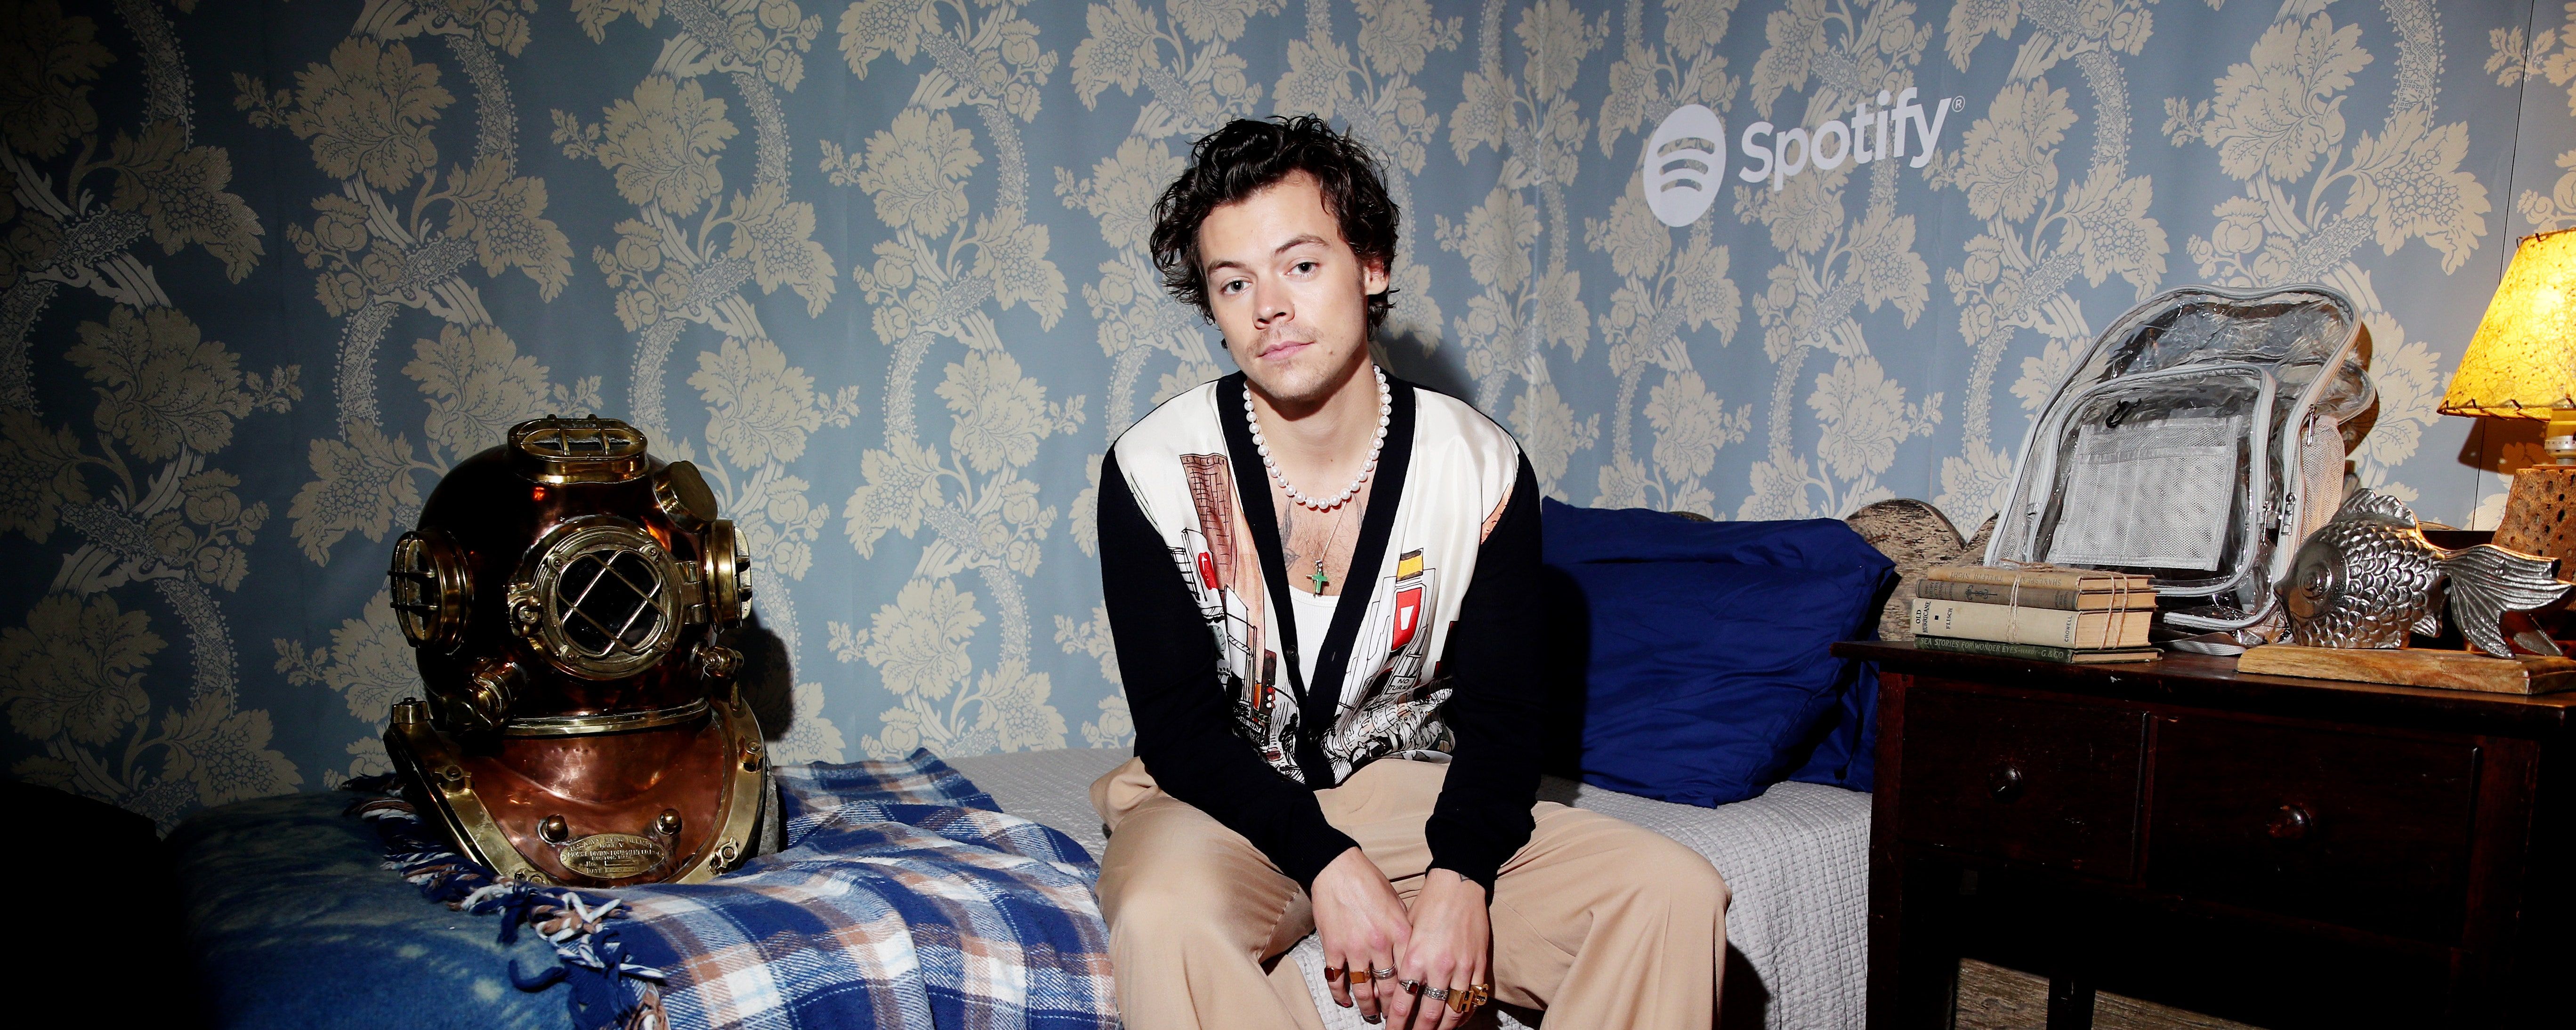 Harry Styles Wore a Very Ruffled Dress for “The Guardian Weekend” Cover